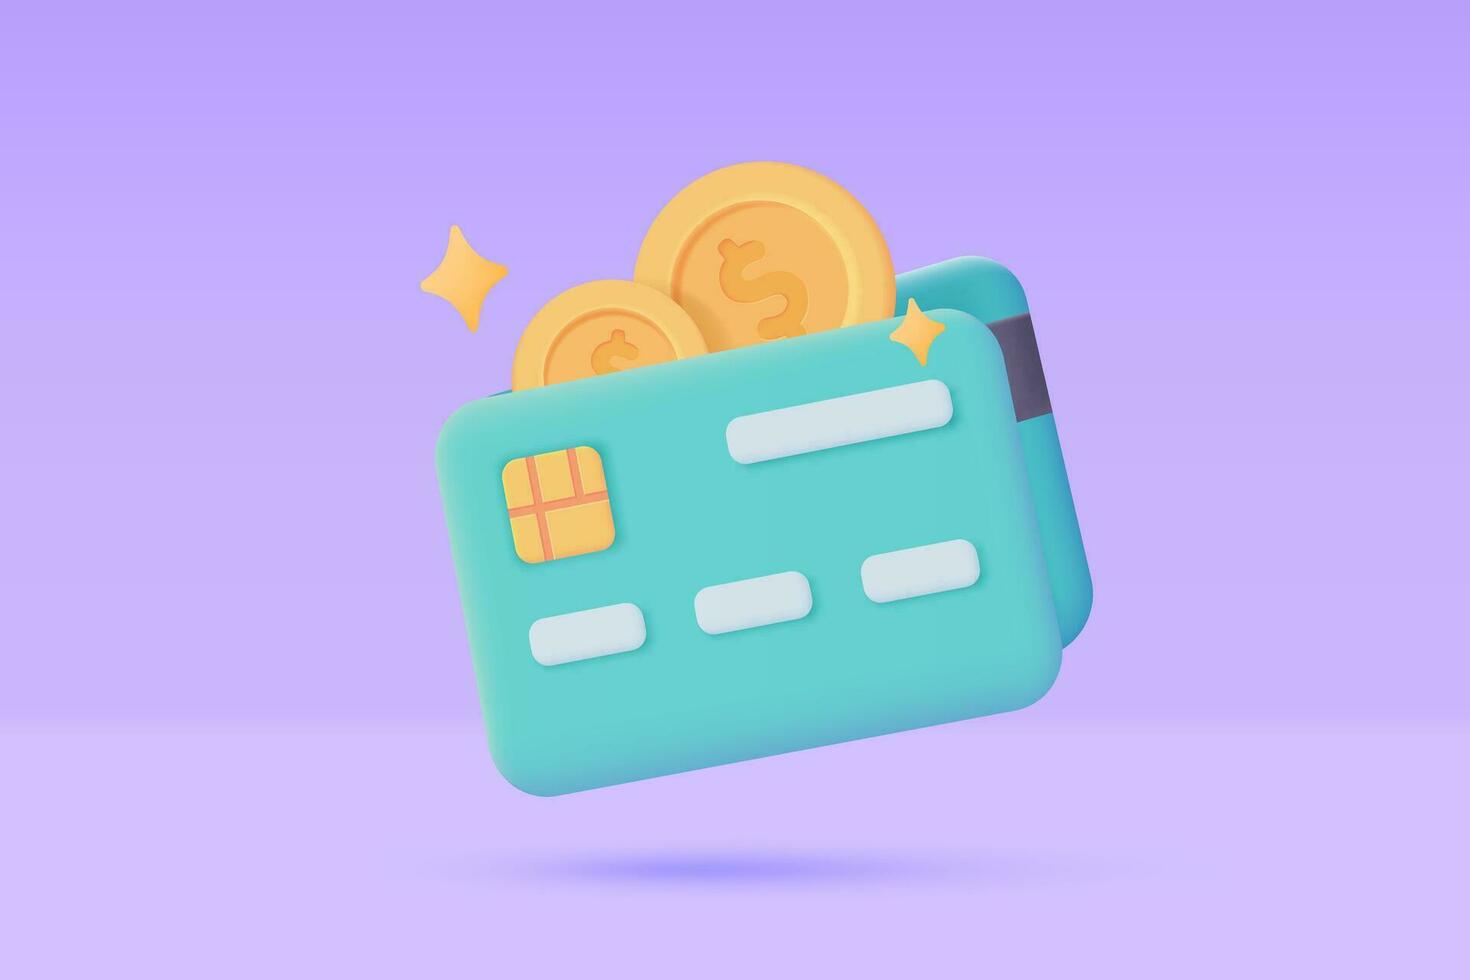 3d credit card icon. Online payment. Cashless society for shopping. 3D illustration. vector